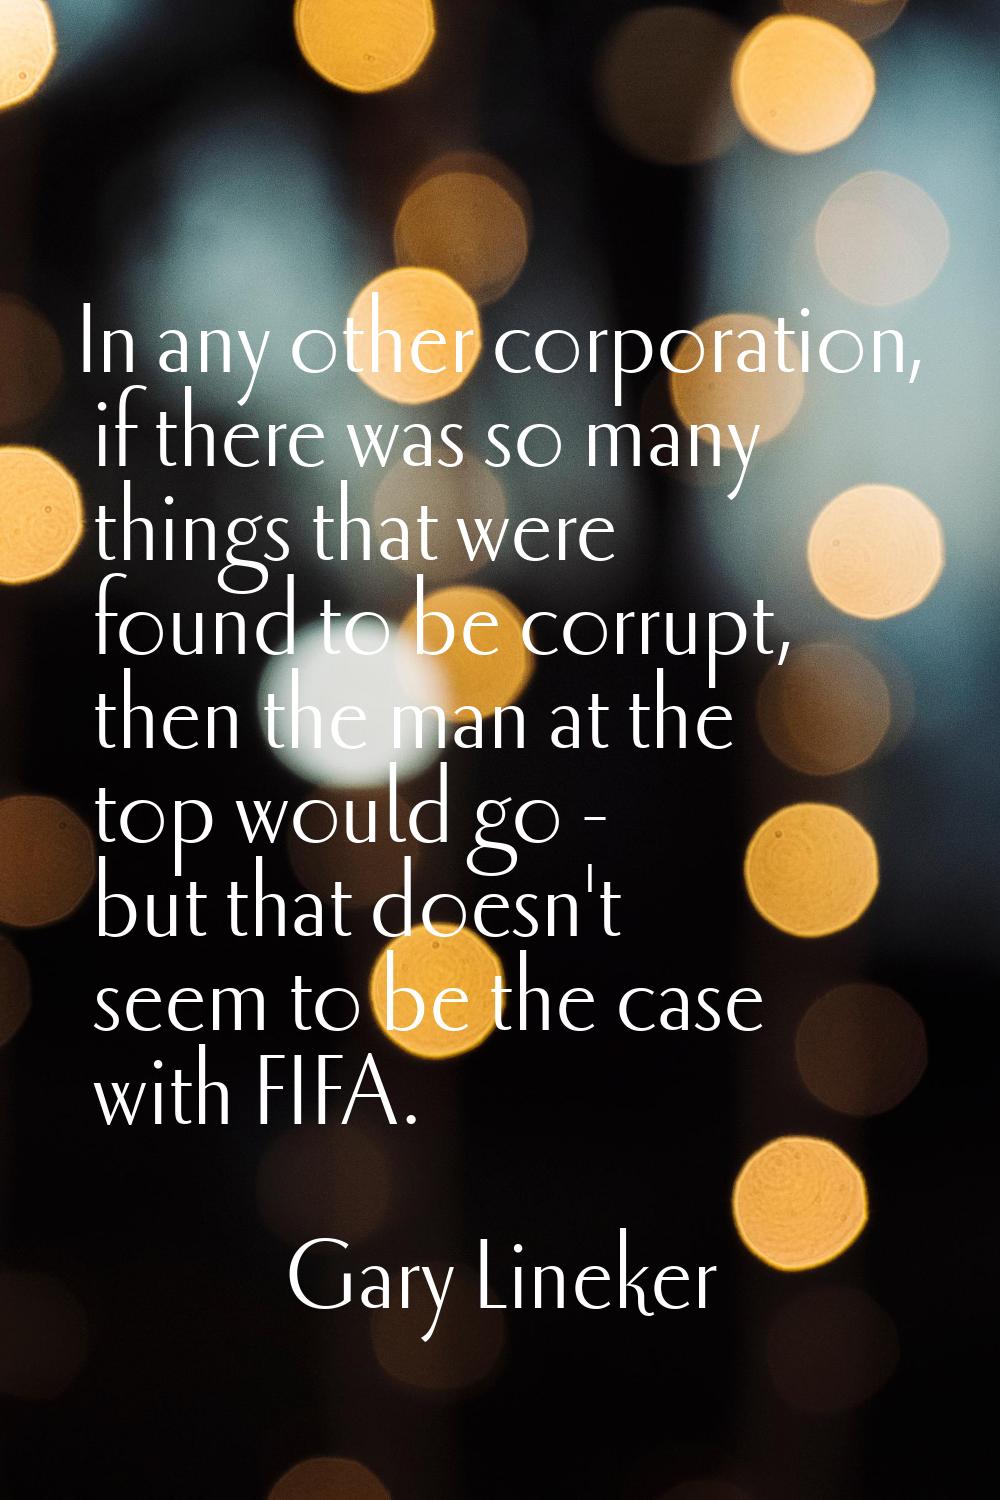 In any other corporation, if there was so many things that were found to be corrupt, then the man a